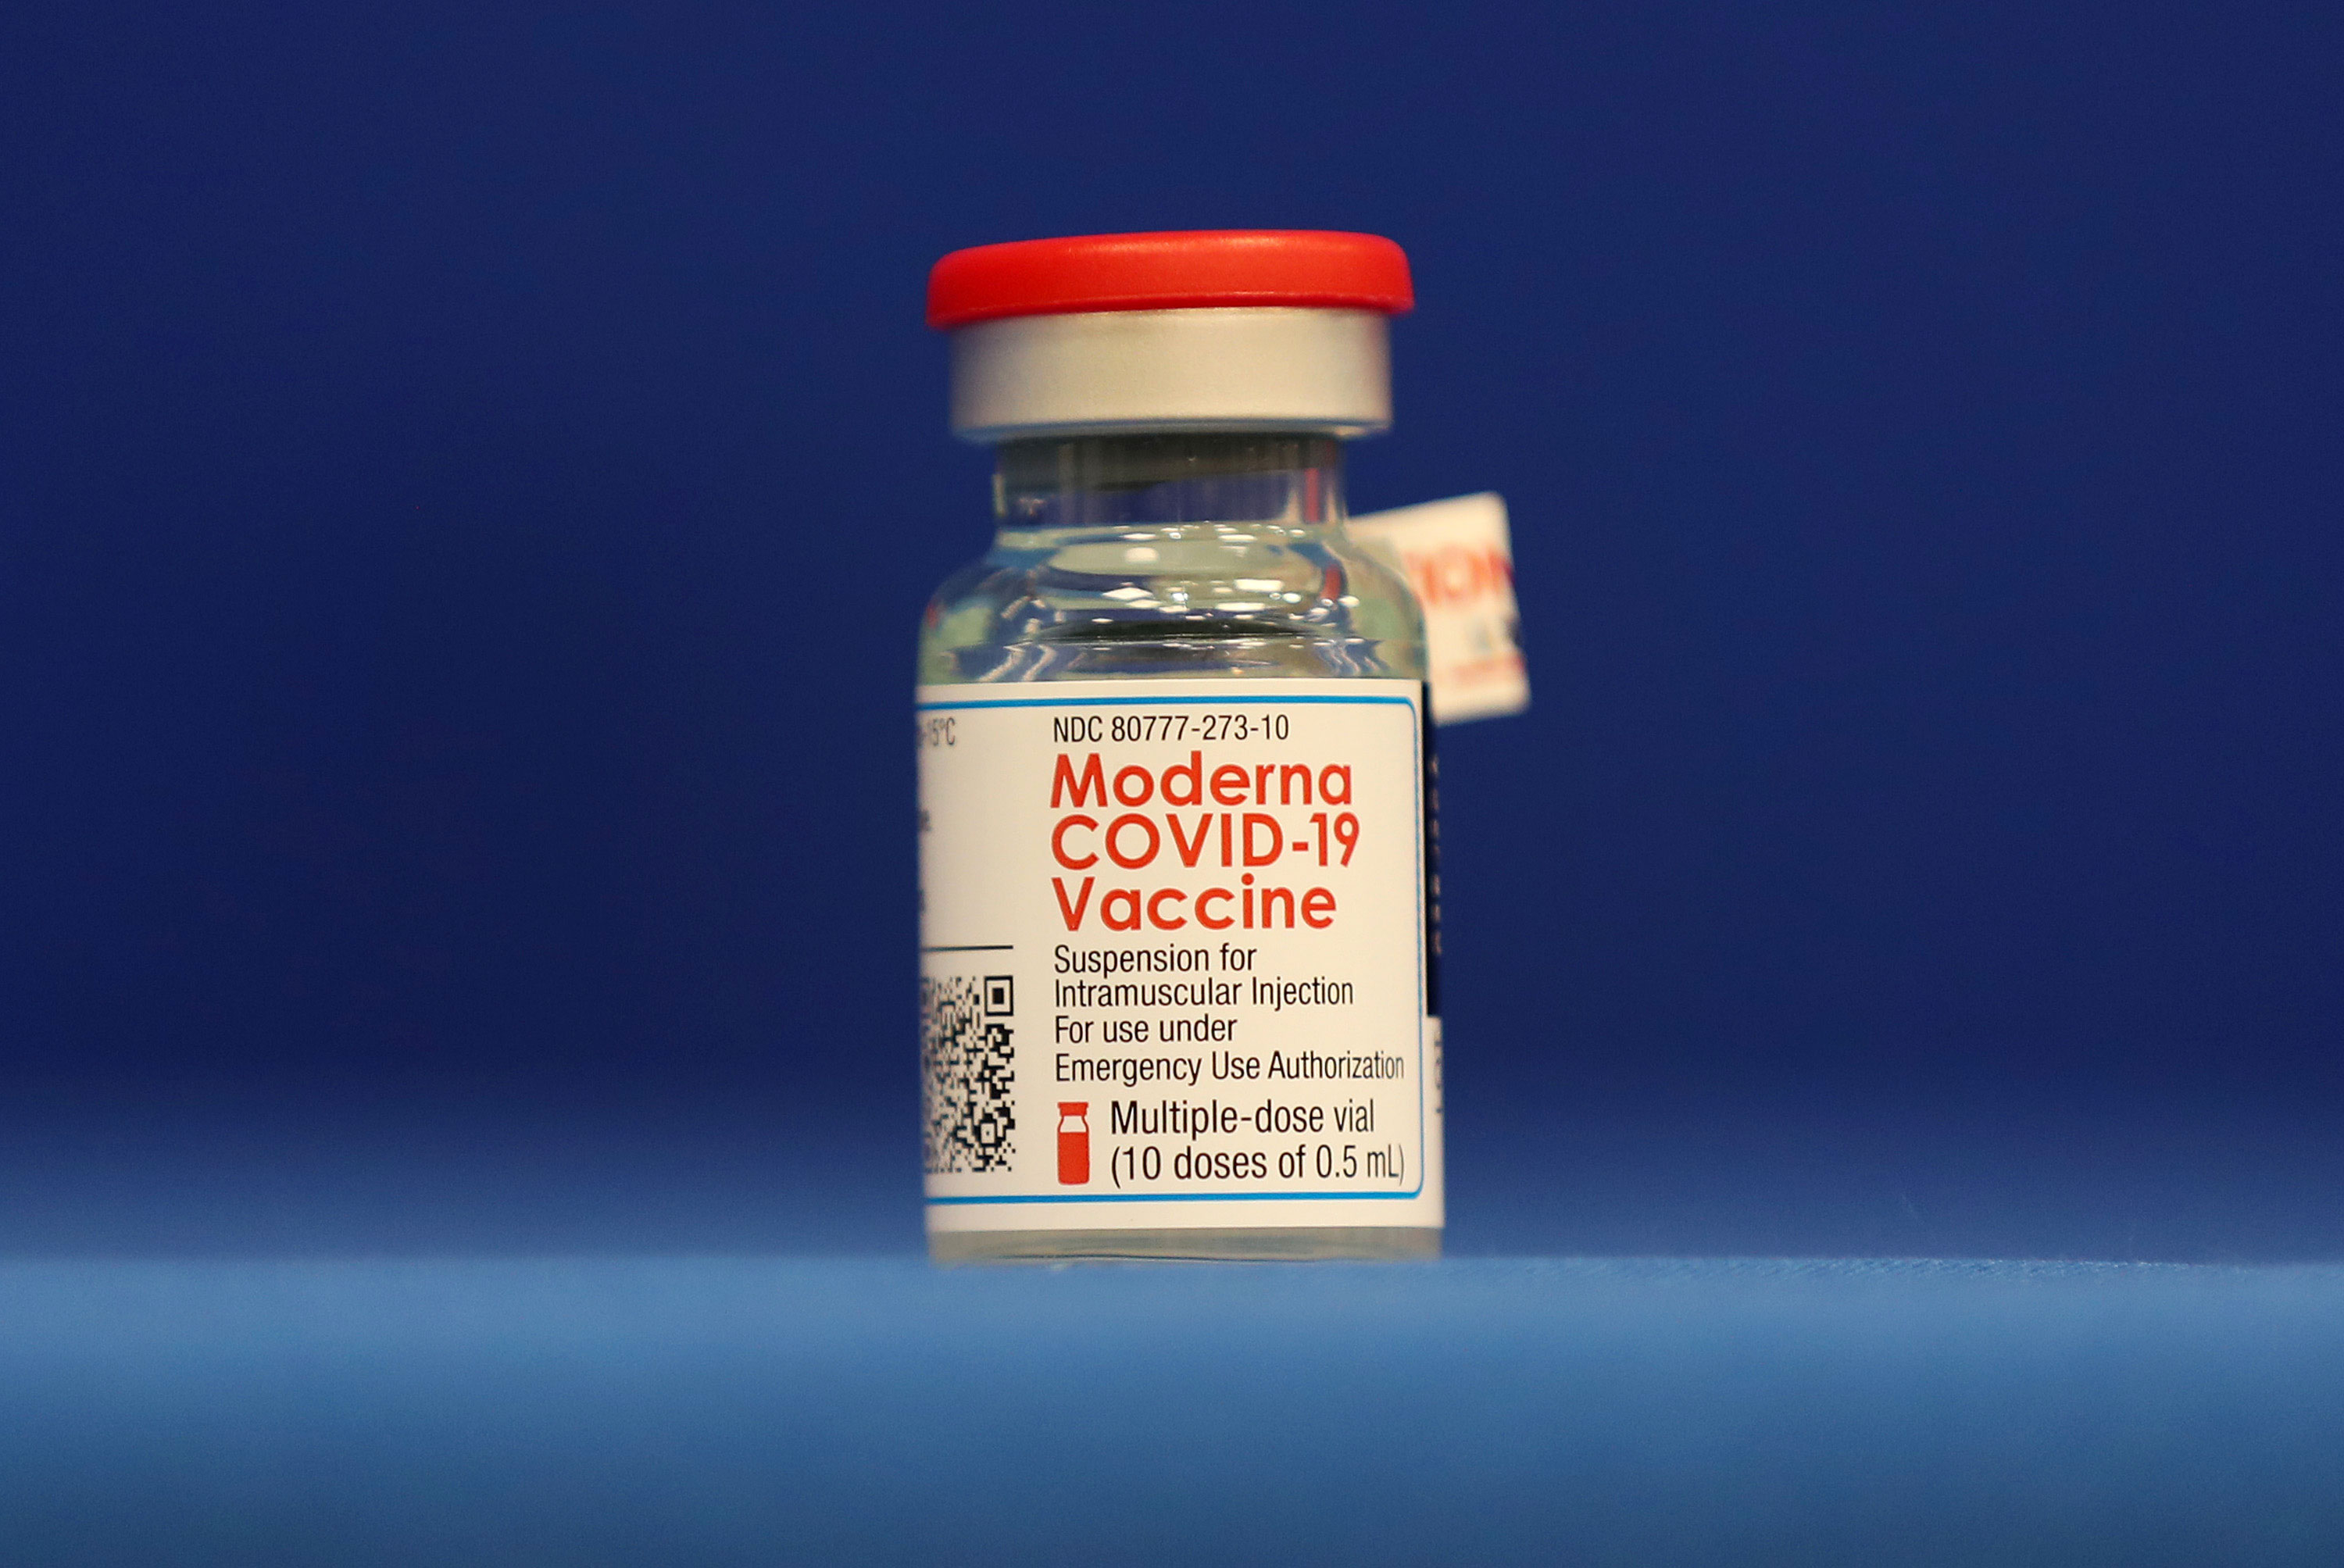 A vial of the Moderna Covid-19 vaccine is pictured during a press conference in Fort Lauderdale, Florida, on December 23.